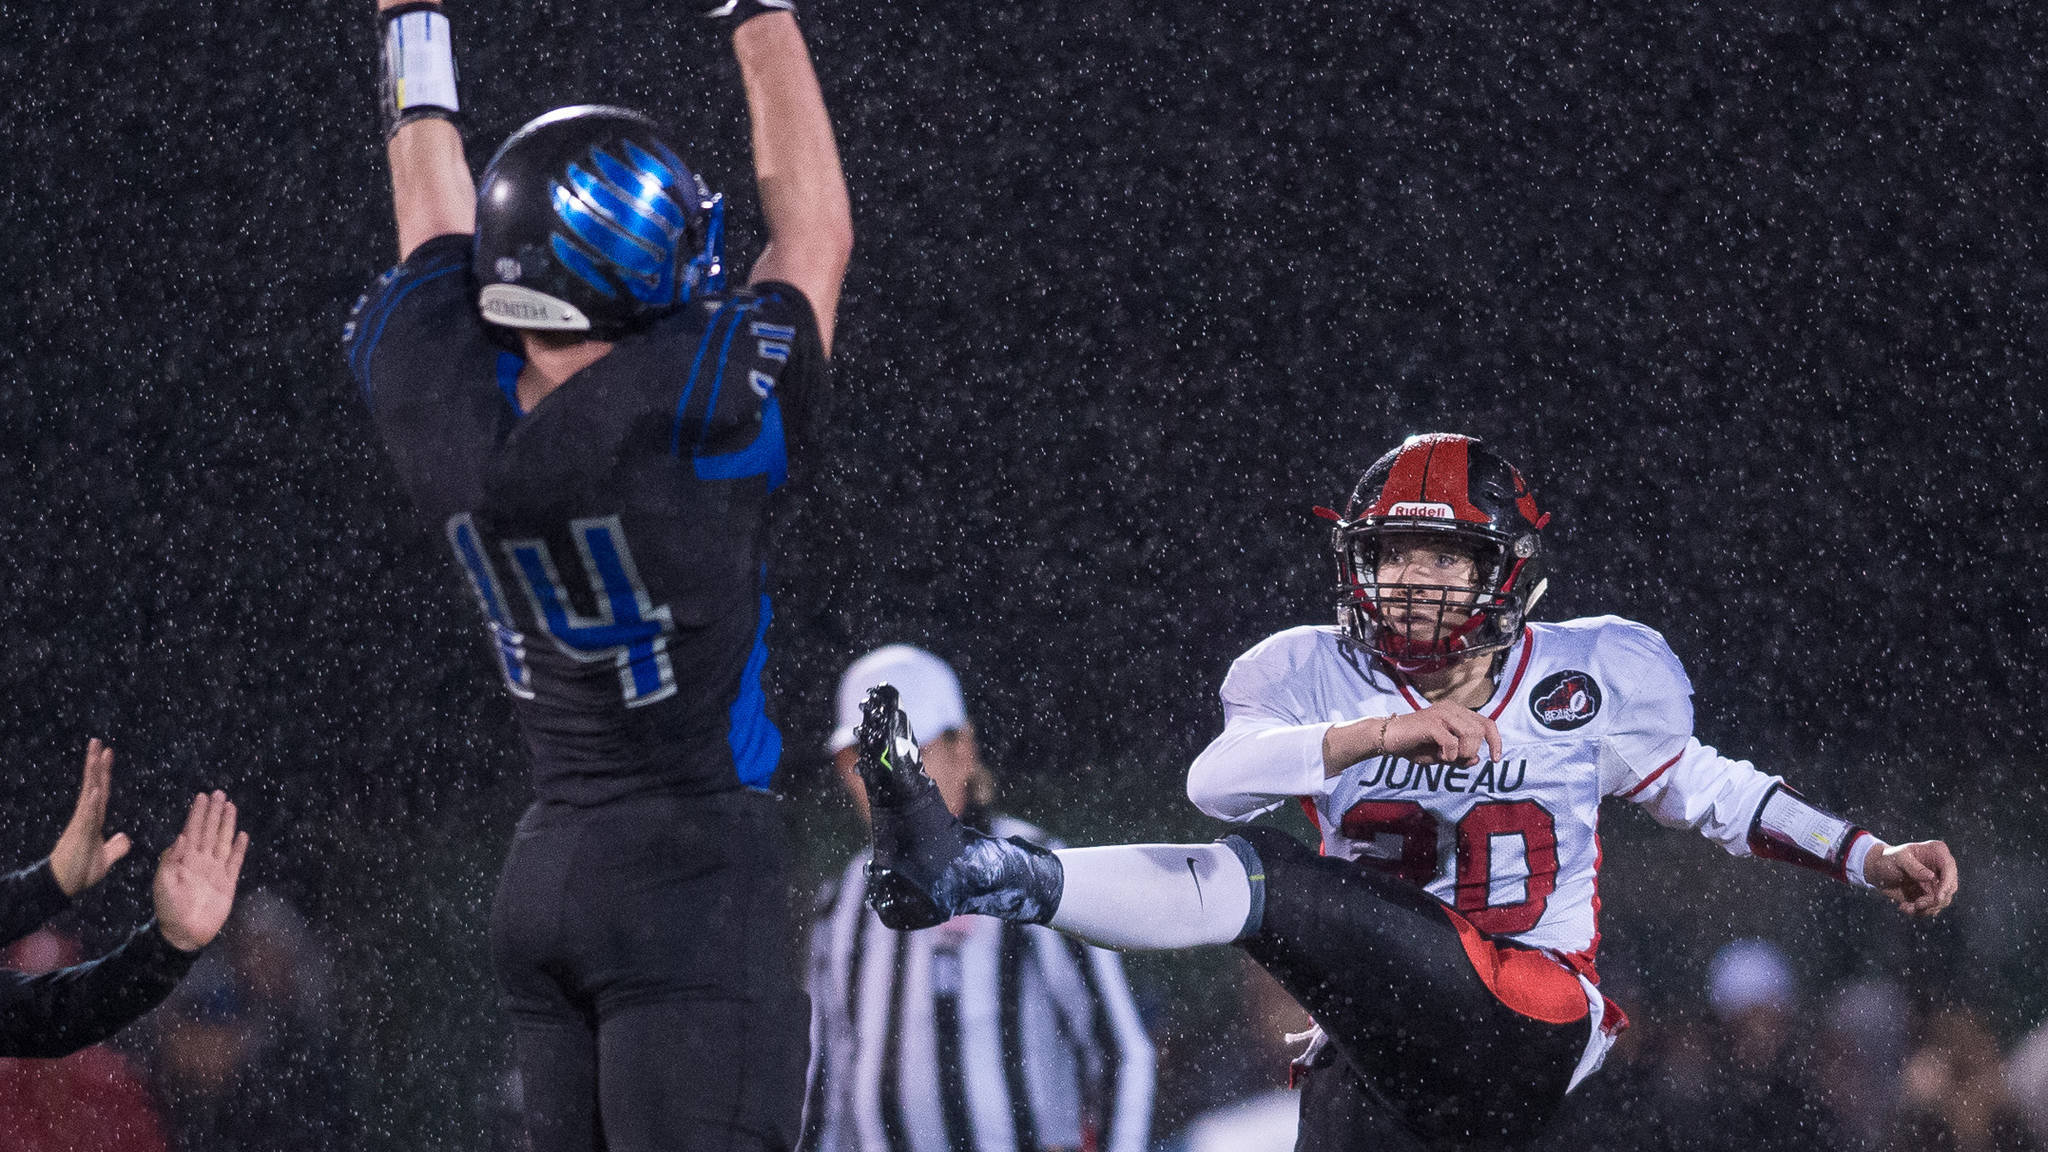 Thunder Mountain’s Caleb Traxler, left, attempts to block Juneau-Douglas’ Cooper Kriegmont’s punt at TMHS in September. The two Juneau football programs are now officially known as the “Juneau Thunder Bears.” (Michael Penn | Juneau Empire File)